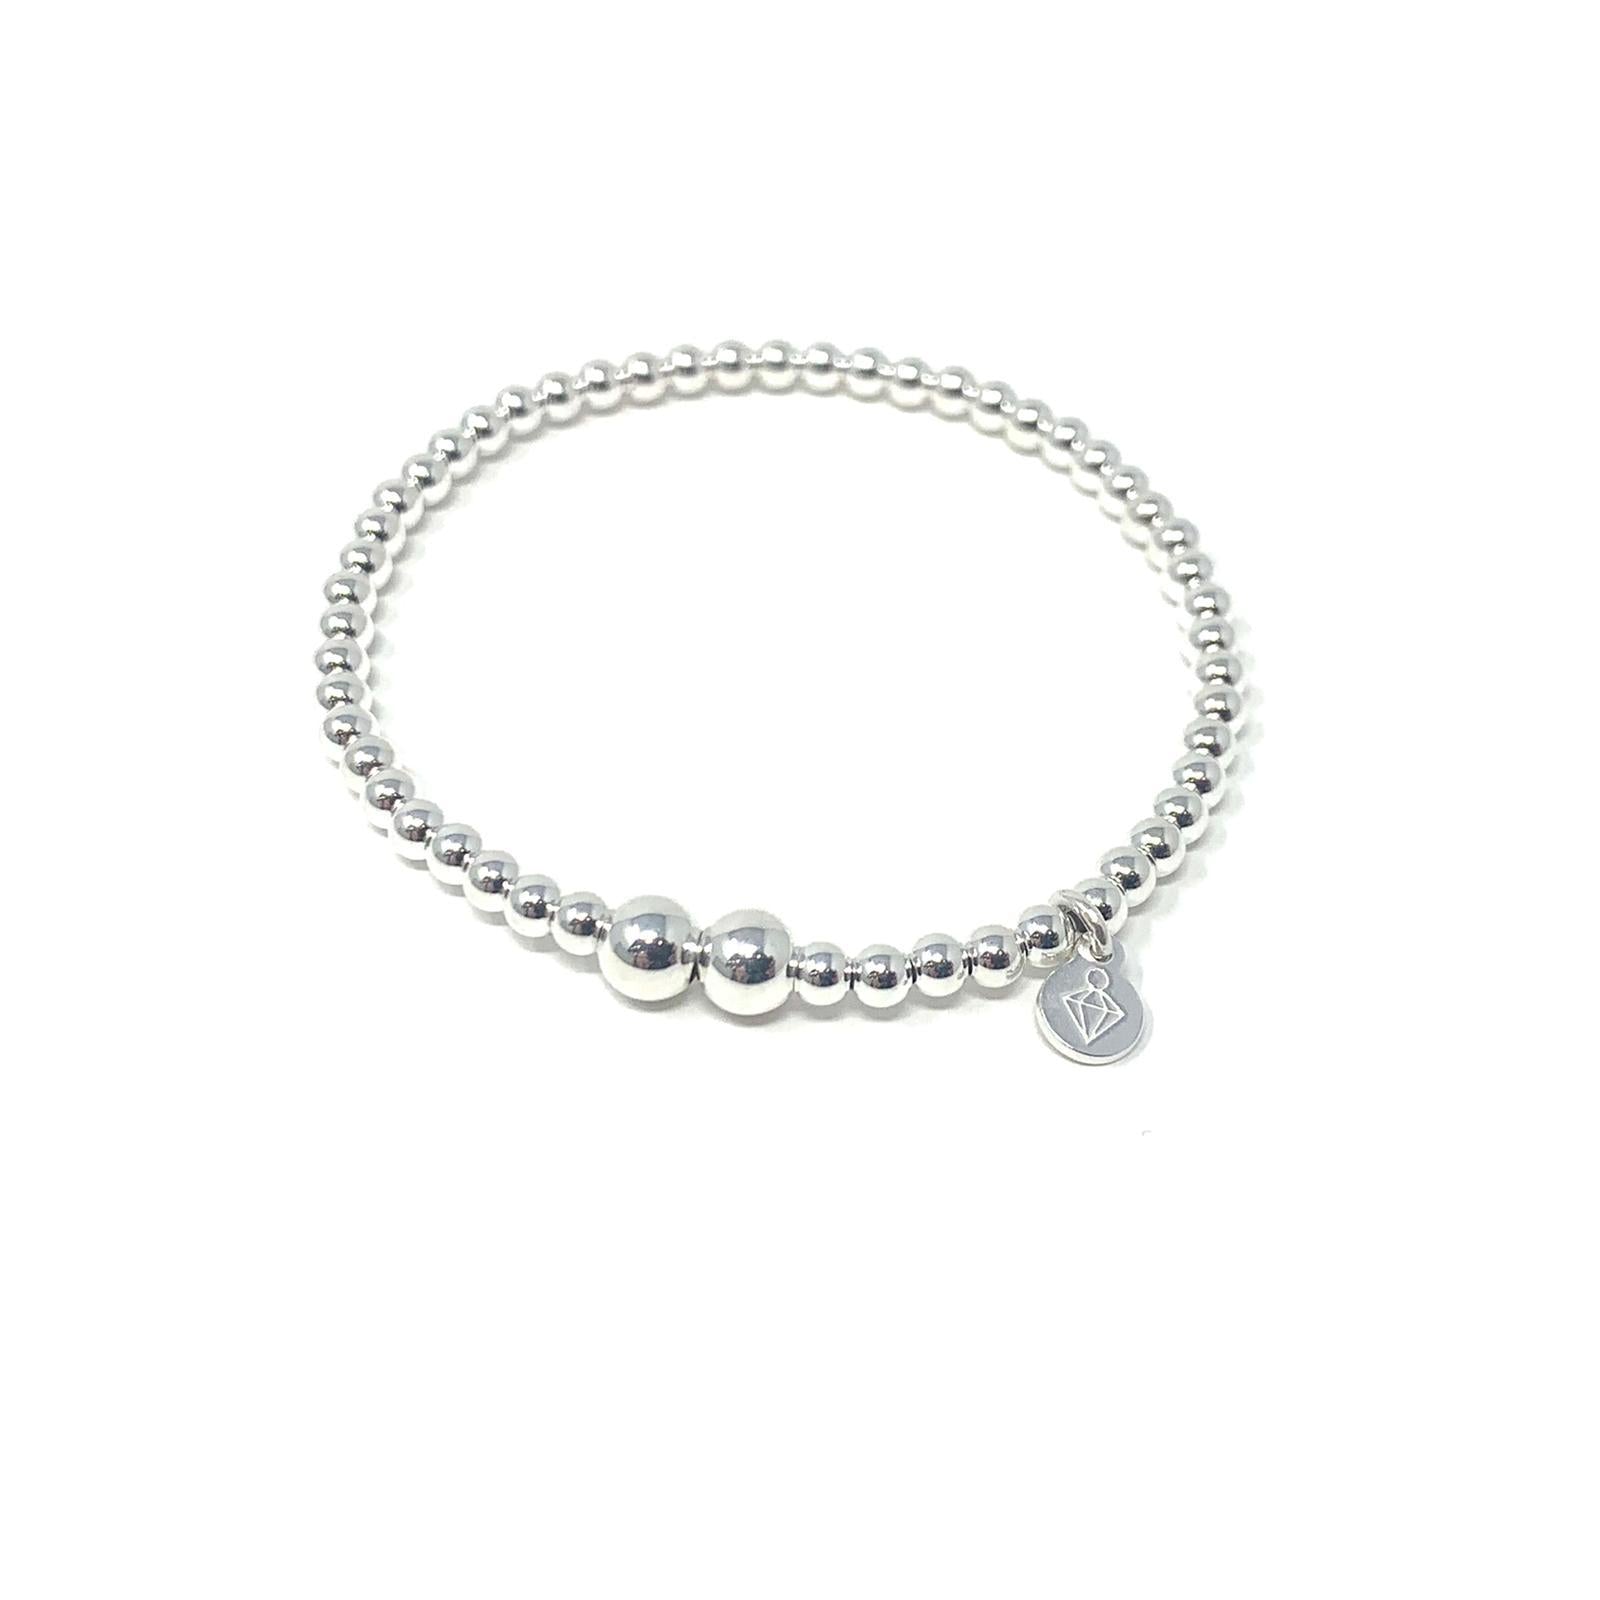 Baby and junior sterling silver ball bracelet - SayItWithDiamonds.com